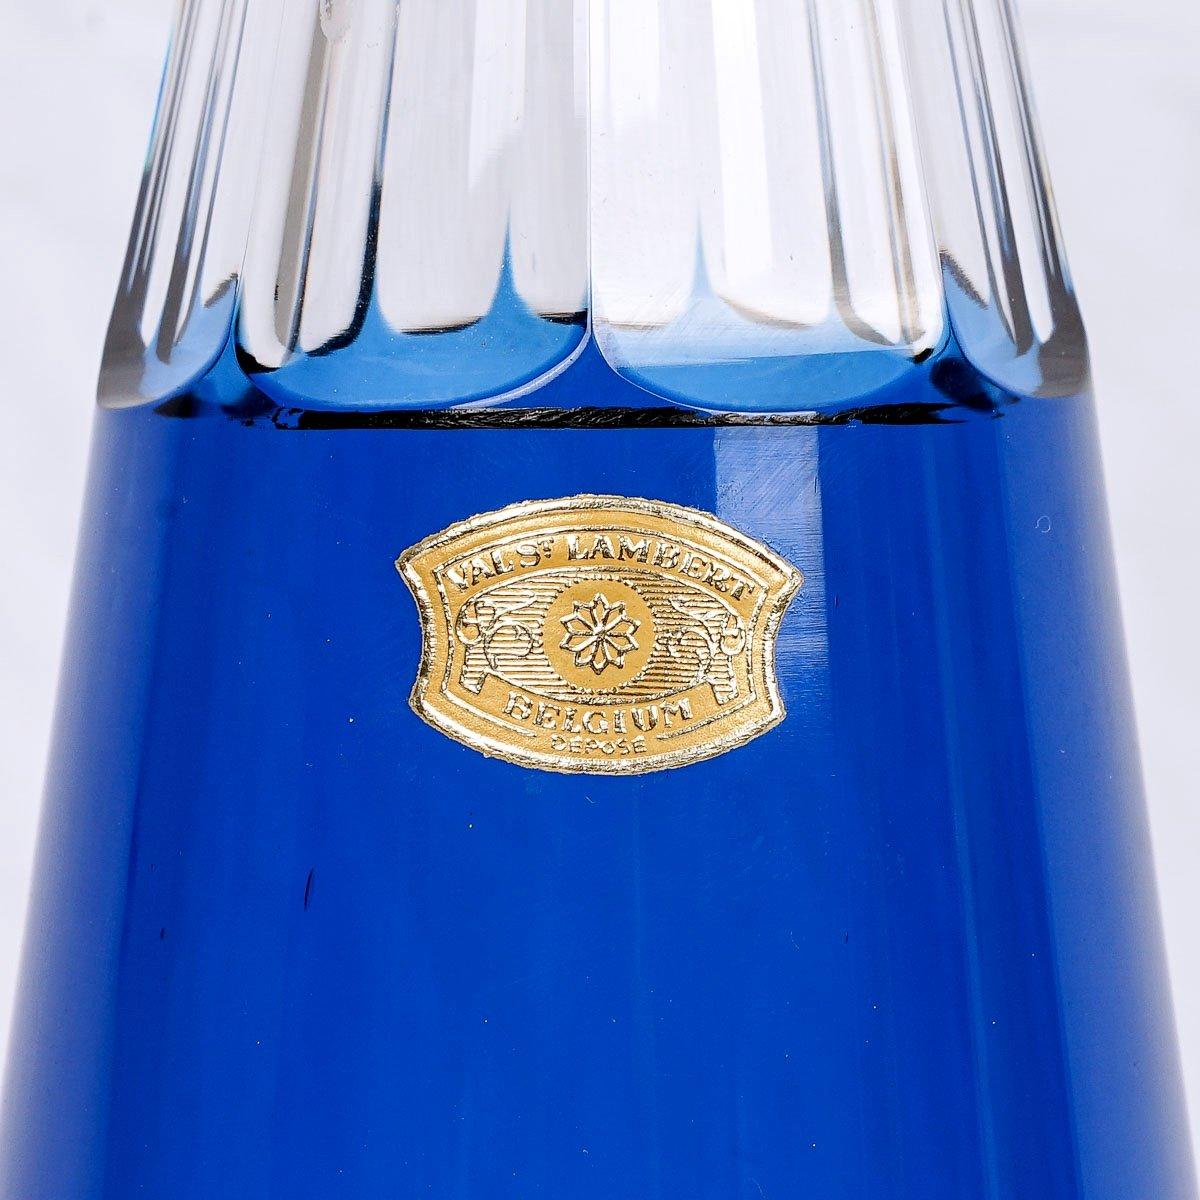 This is a delightful blue-lined cut crystal decanter, the 